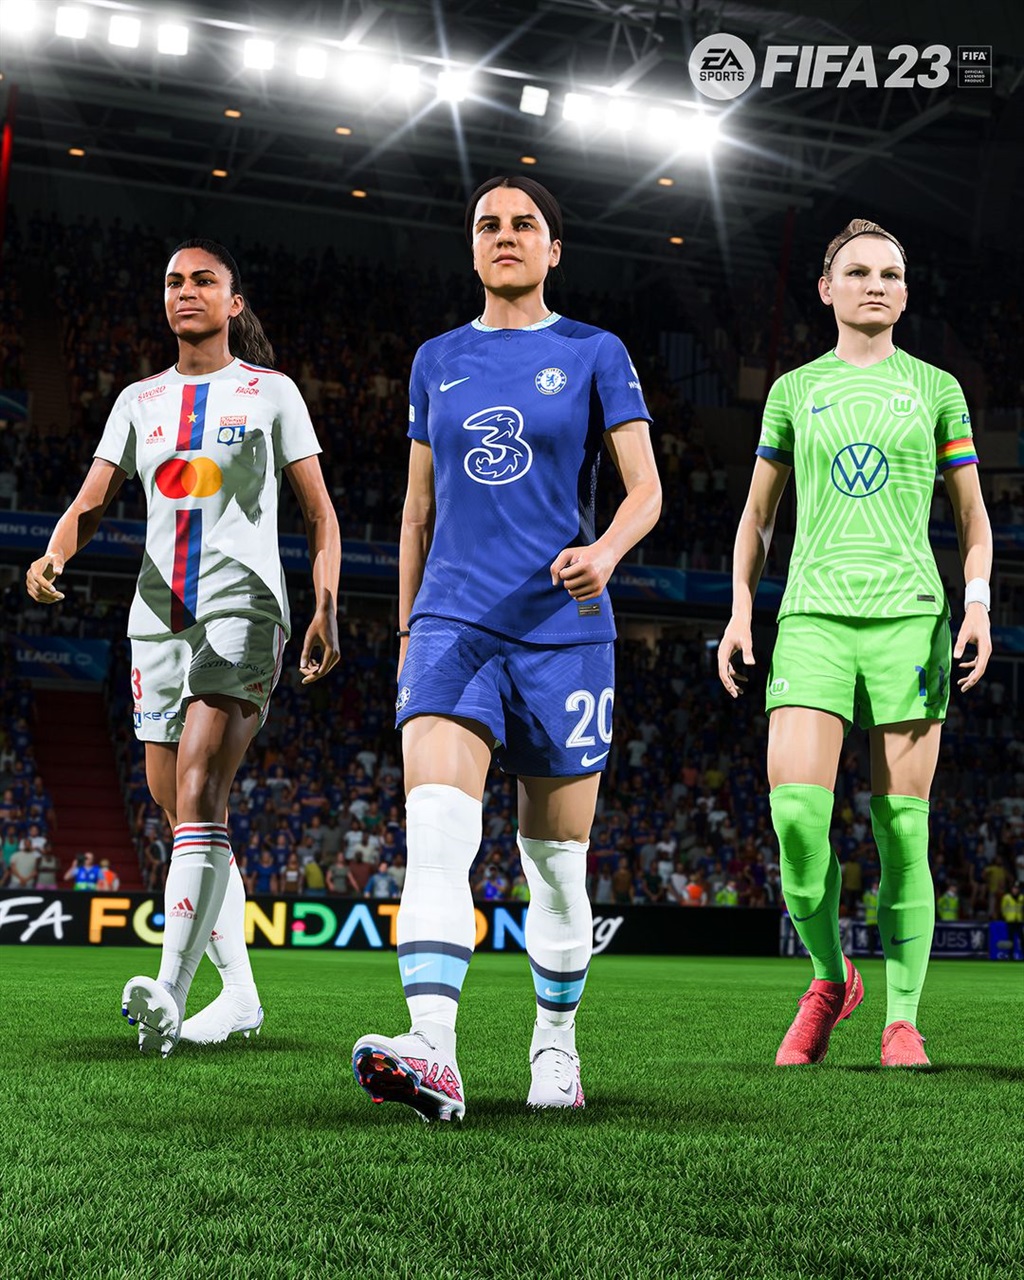 EA Sports has announced the starting dates for the UEFA Women's Champions League and the NWSL on FIFA 23.